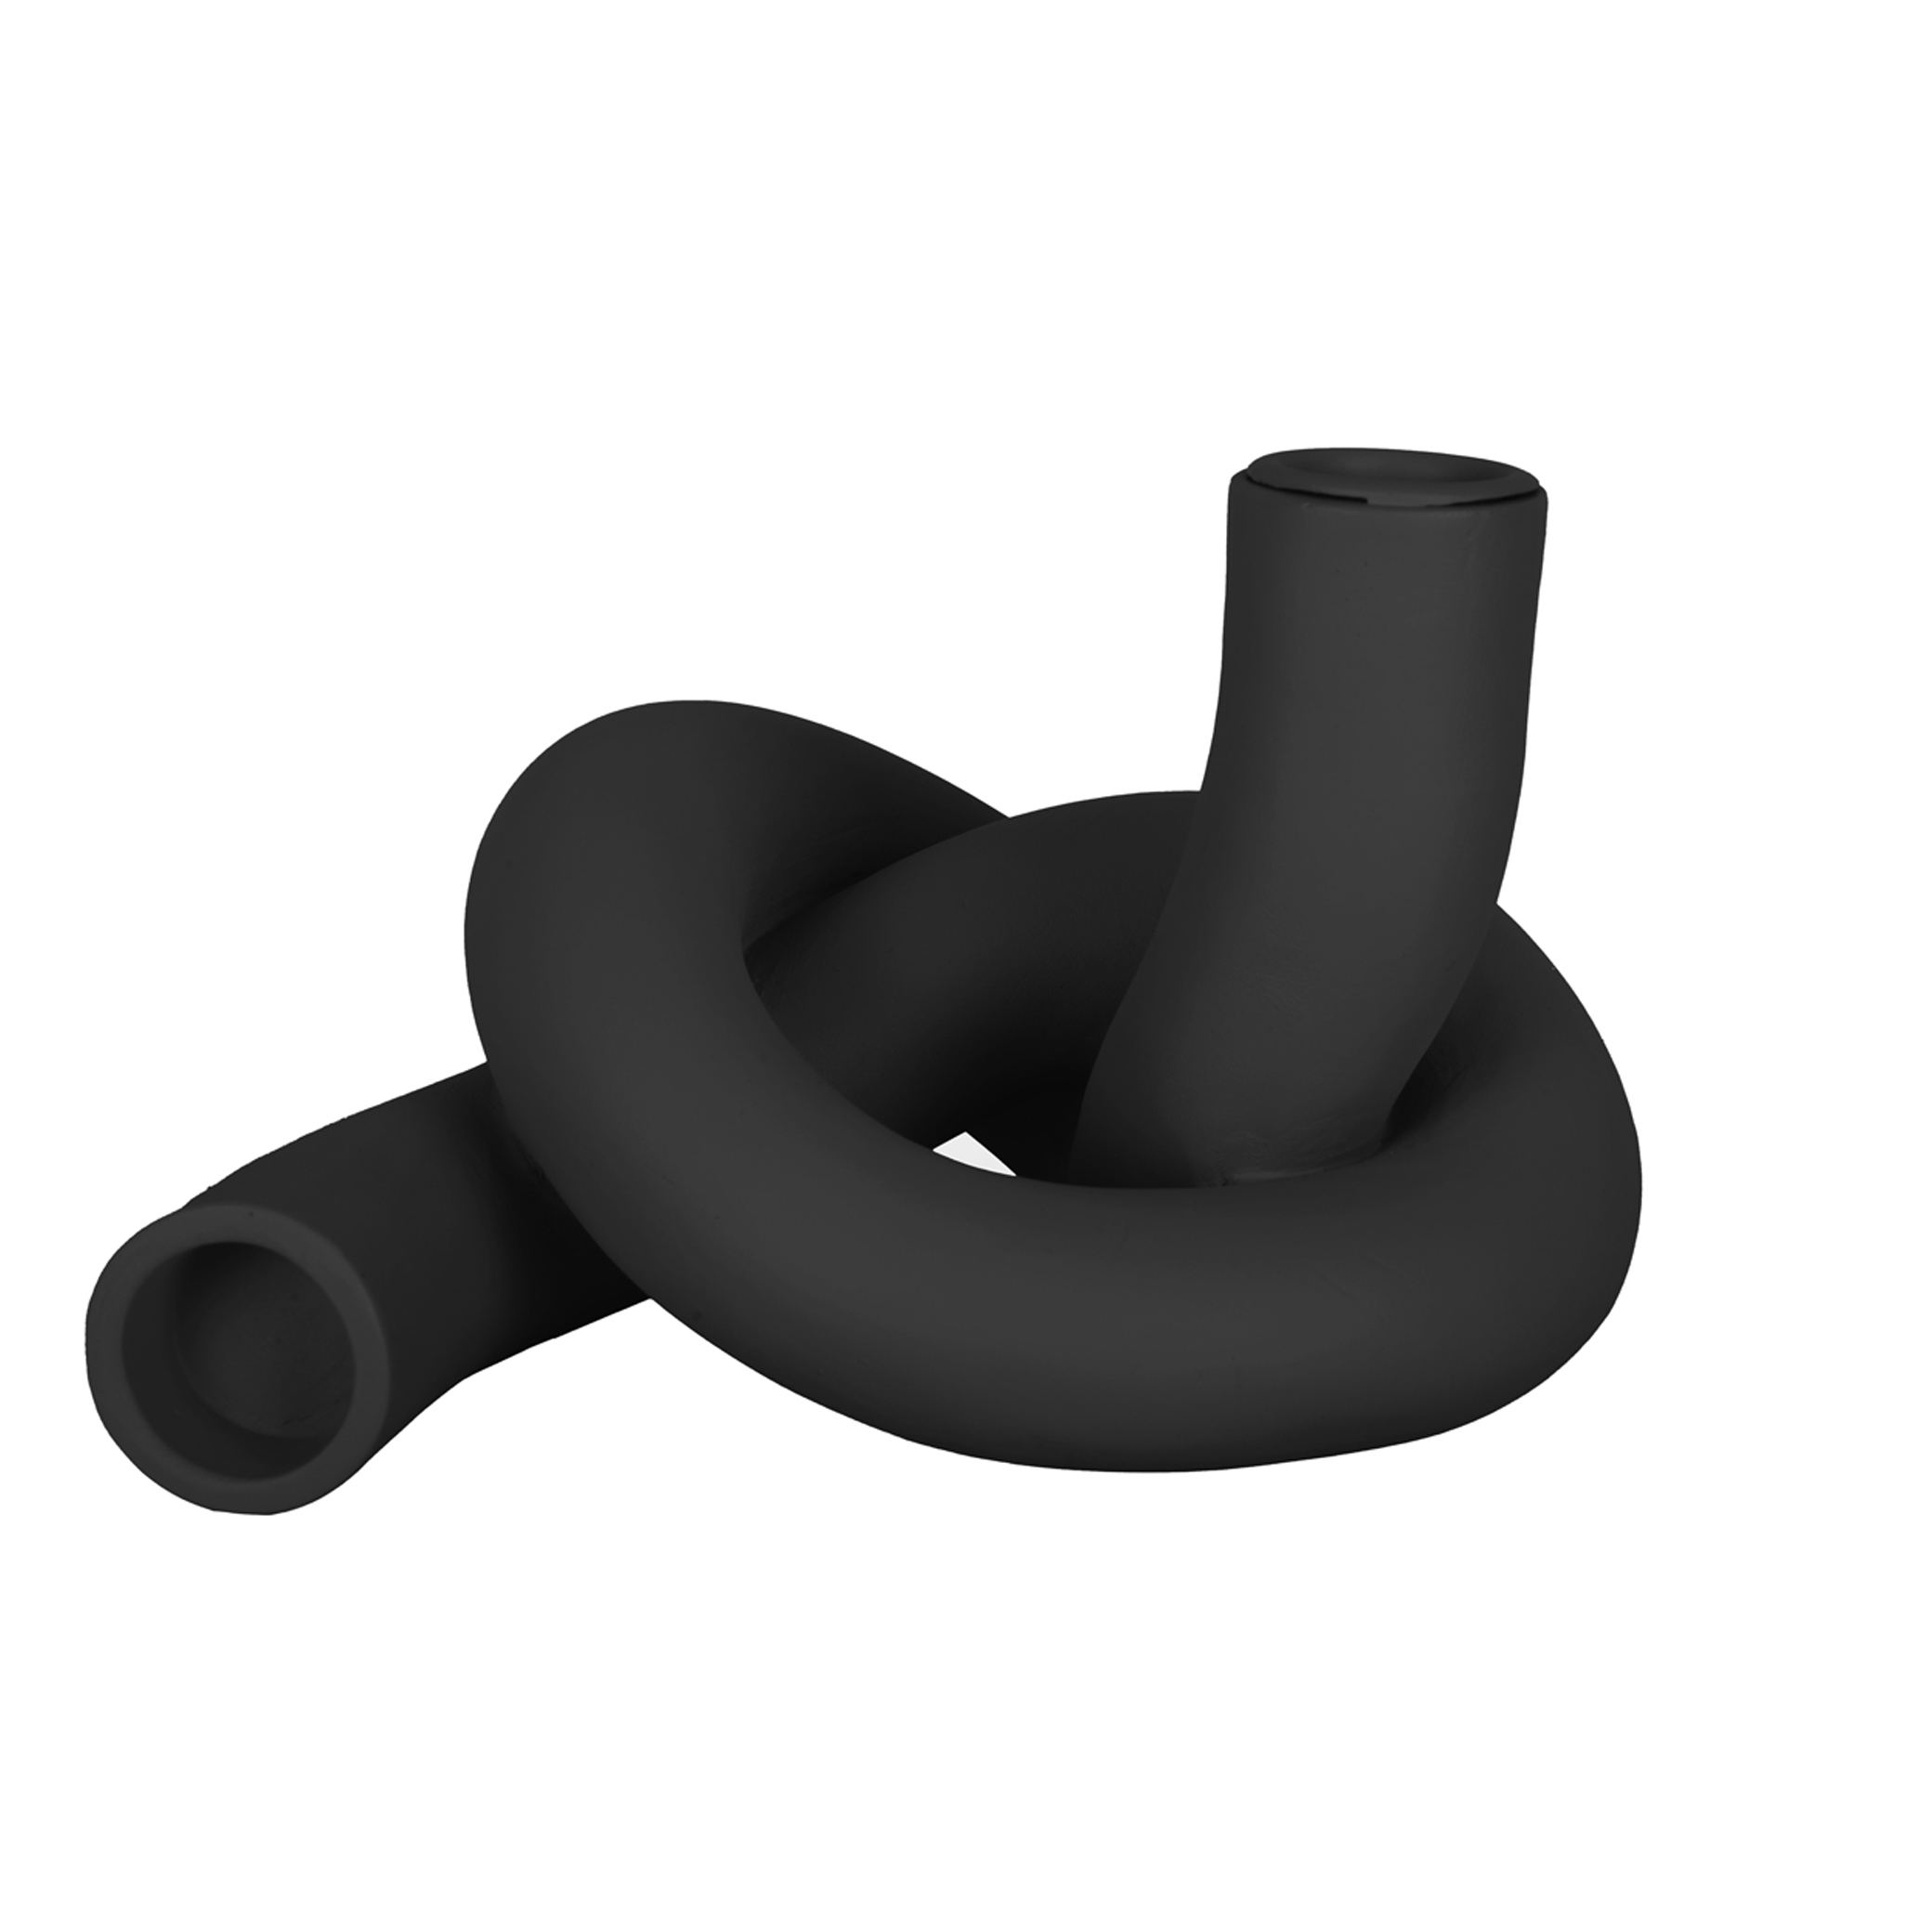 present-time-single-knot-sculpture-candle-holder-midnight-black